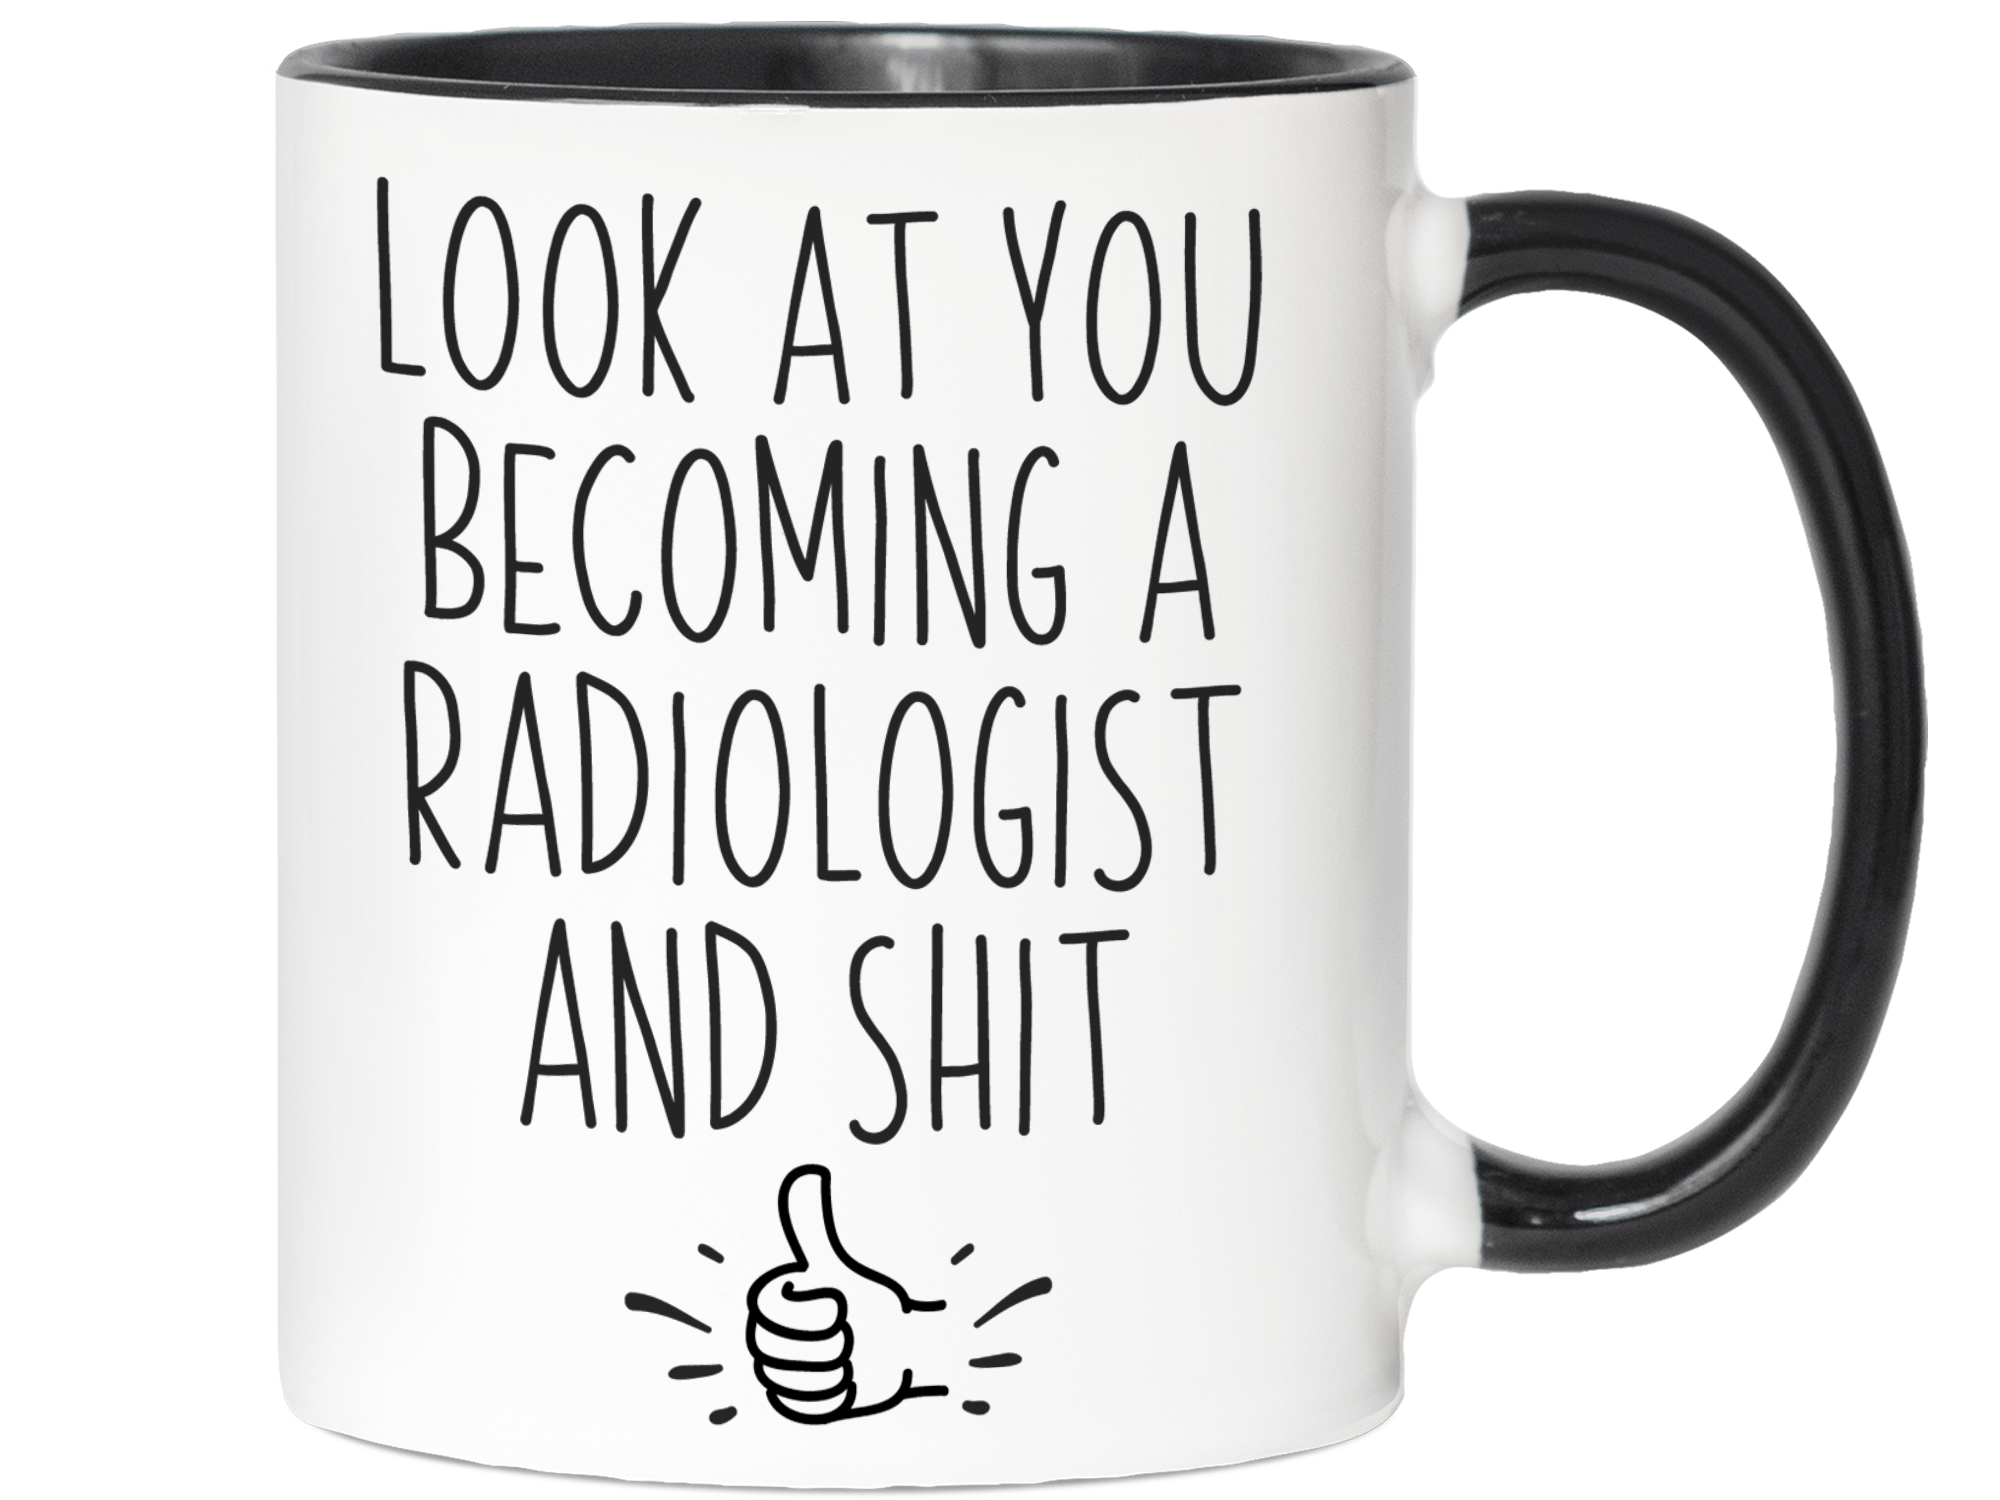 Graduation Gifts for Radiologists - Look at You Becoming a Radiologist and Shit Funny Coffee Mug